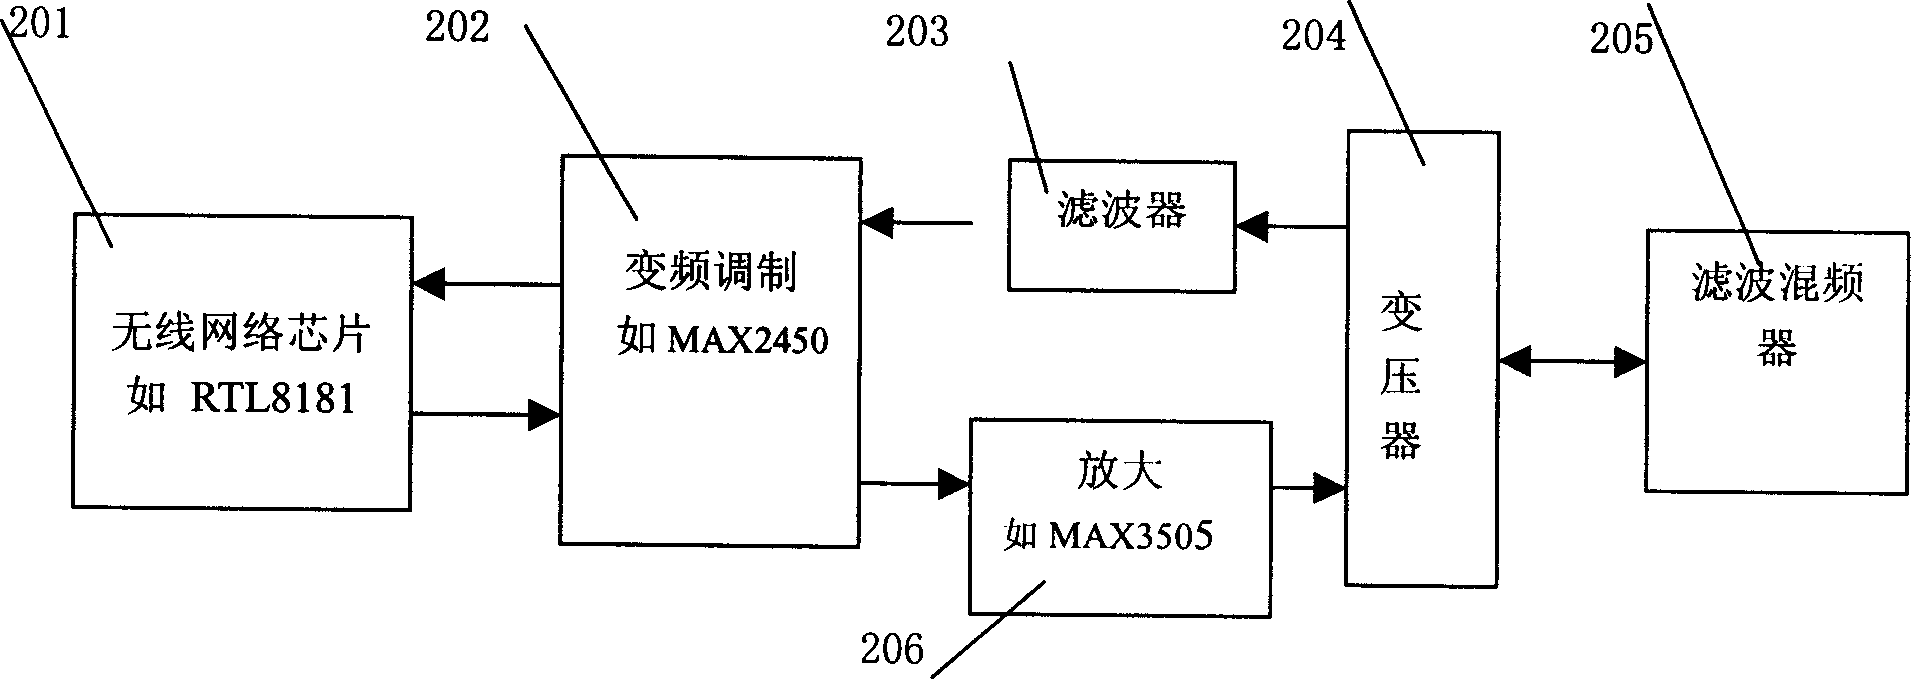 Integrated implementation device of television, network transmission